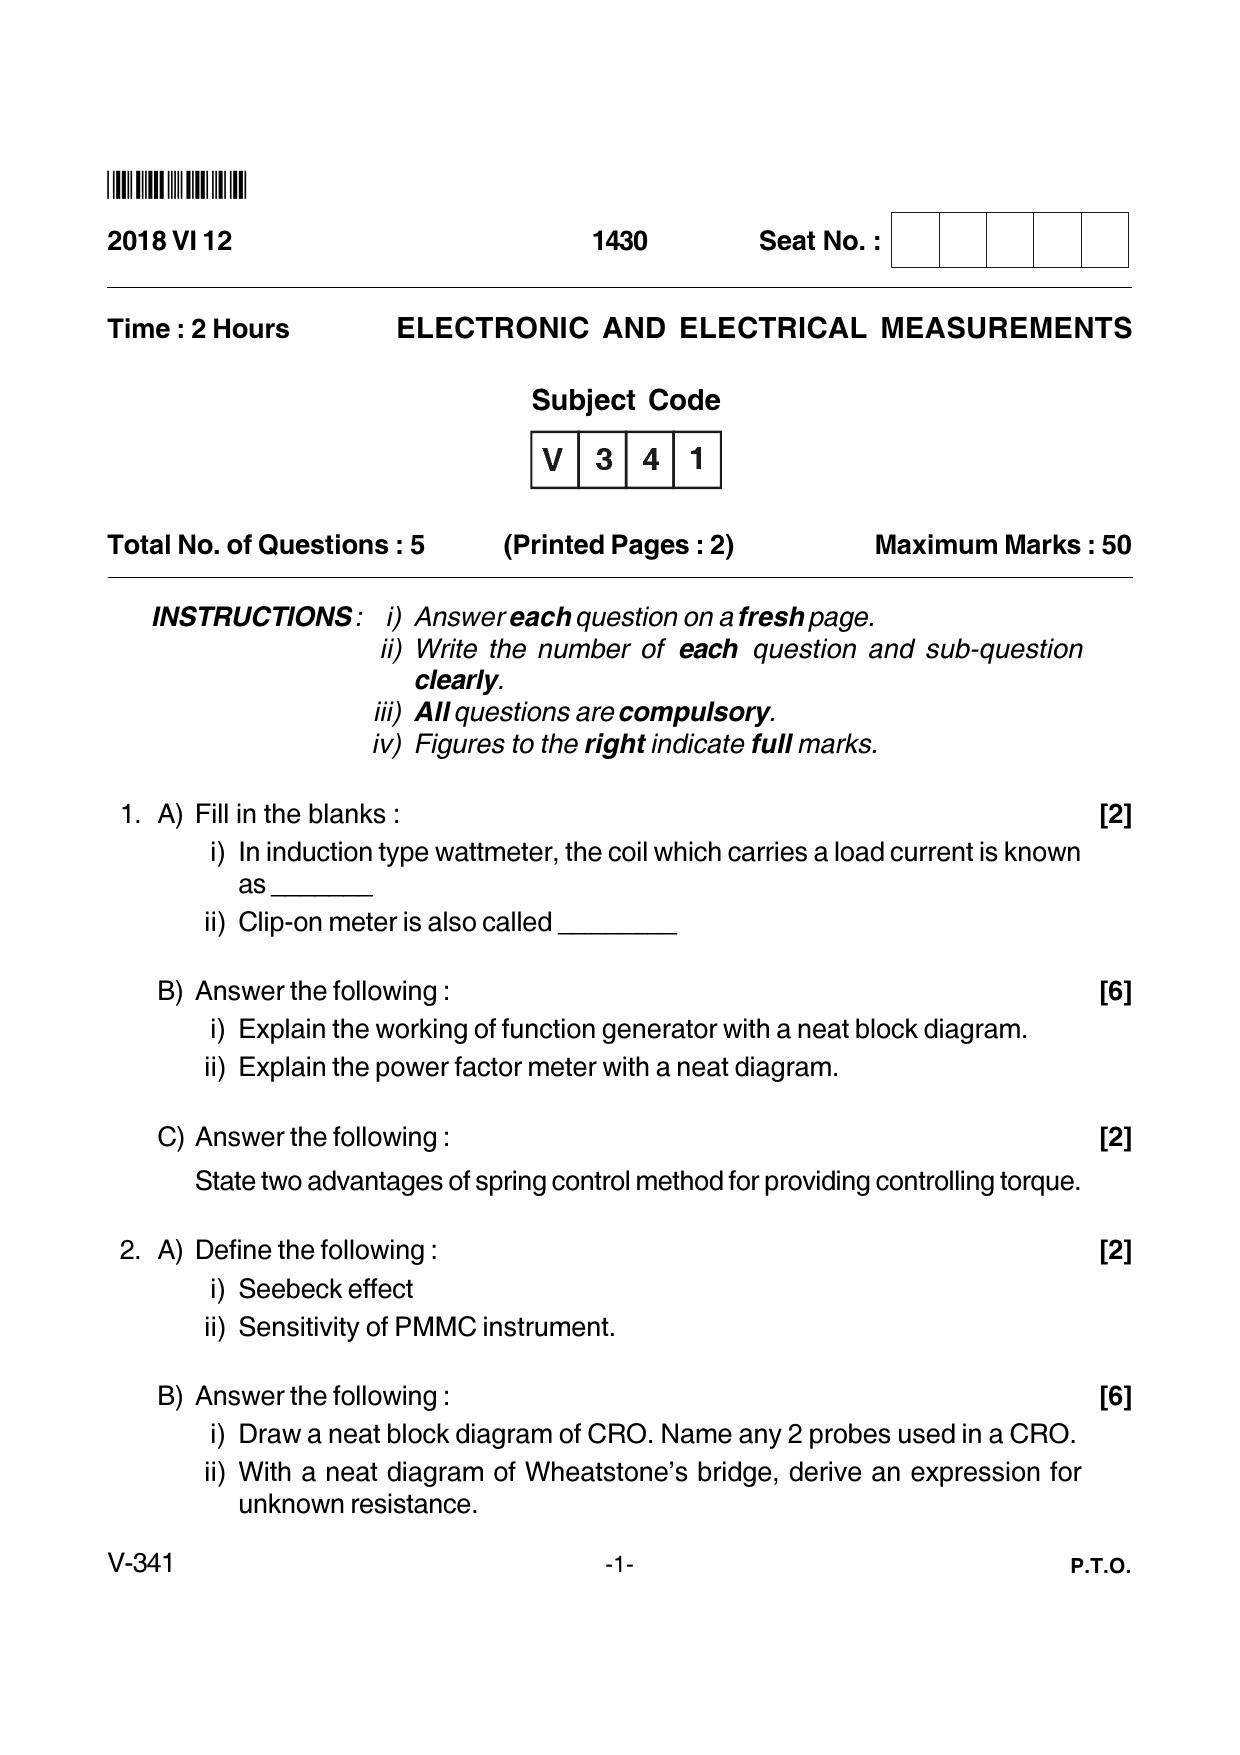 Goa Board Class 12 Electronic and Electrical Measurements  Voc 341 (June 2018) Question Paper - Page 1